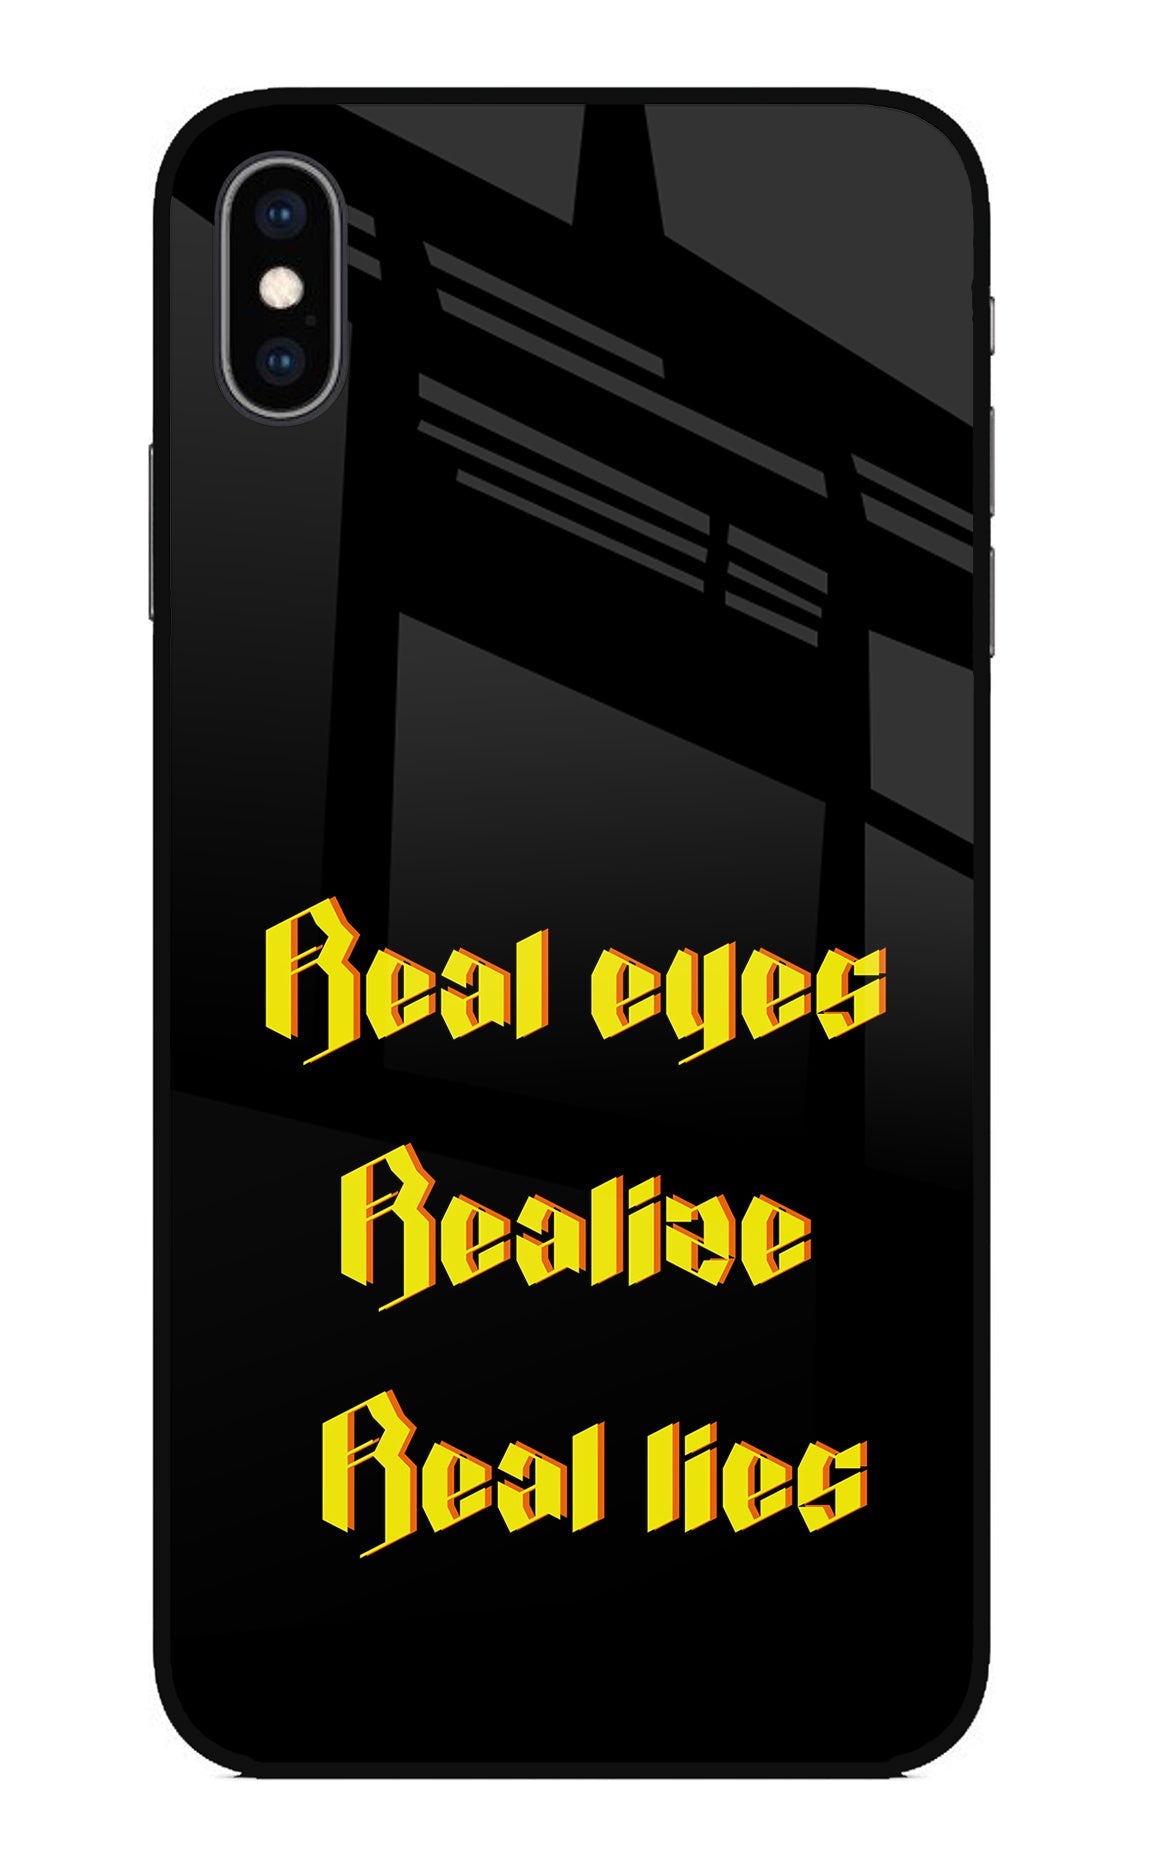 Real Eyes Realize Real Lies iPhone XS Max Glass Case